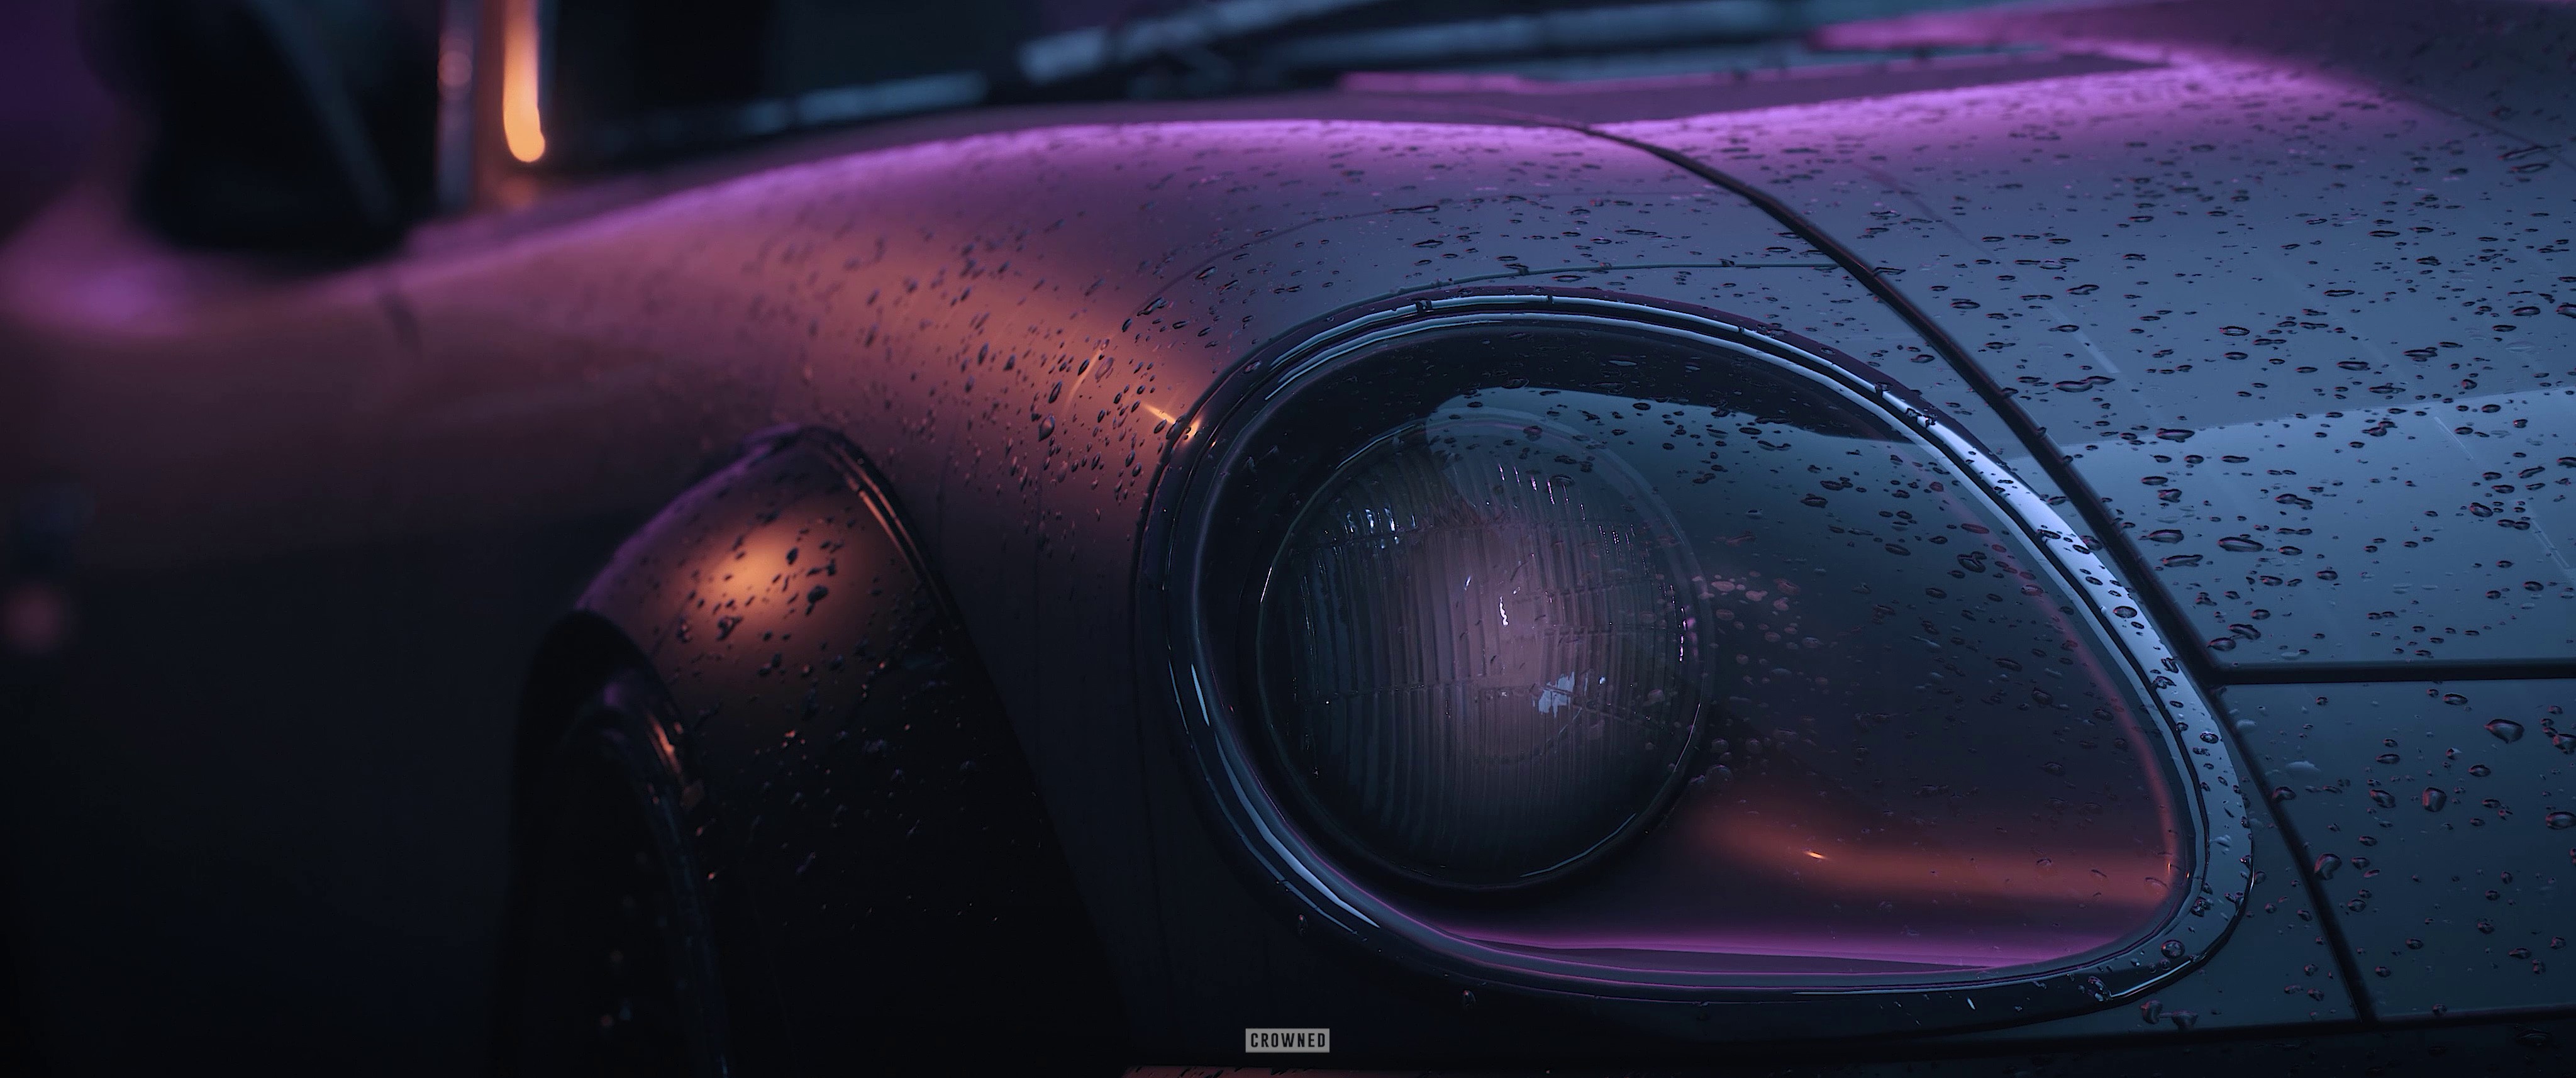 CROWNED, Need for Speed, Datsun 240Z Wallpaper